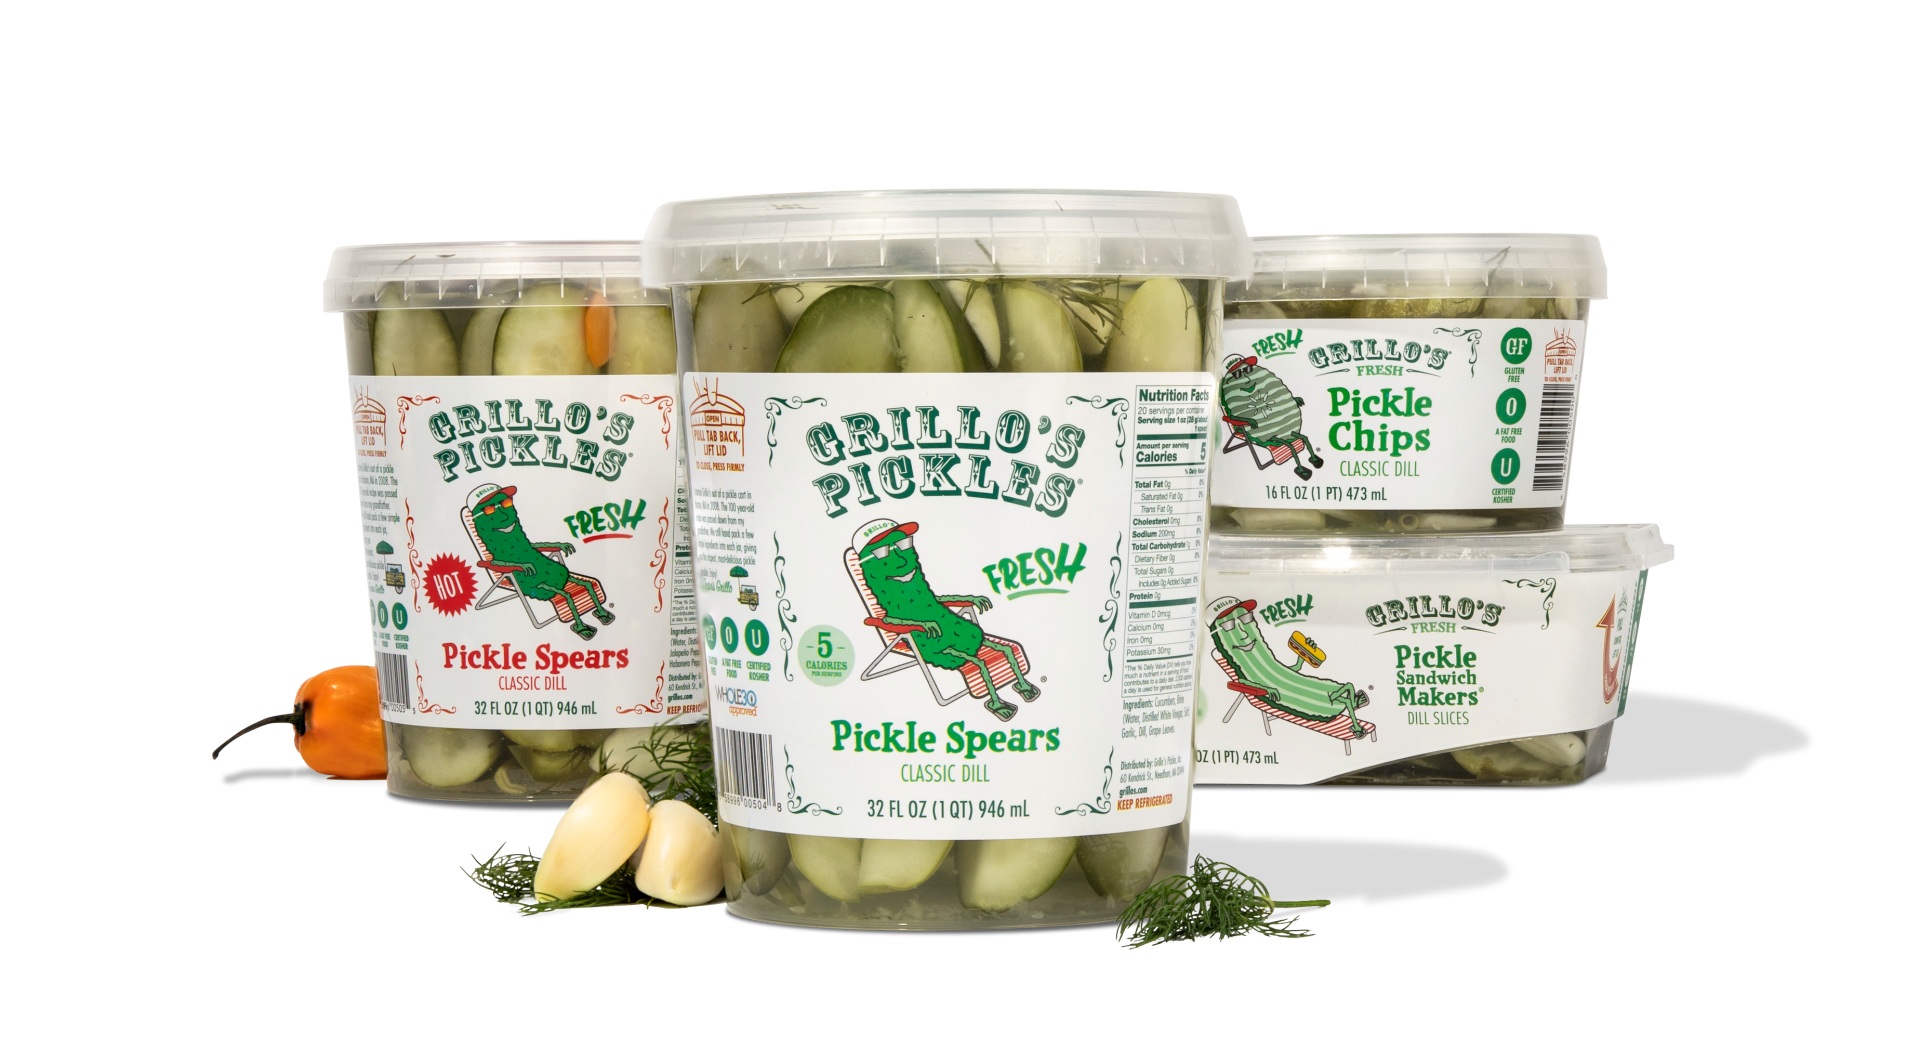 Grillo’s Pickles Restyle The Snack Industry With Crisp + Fresh Product